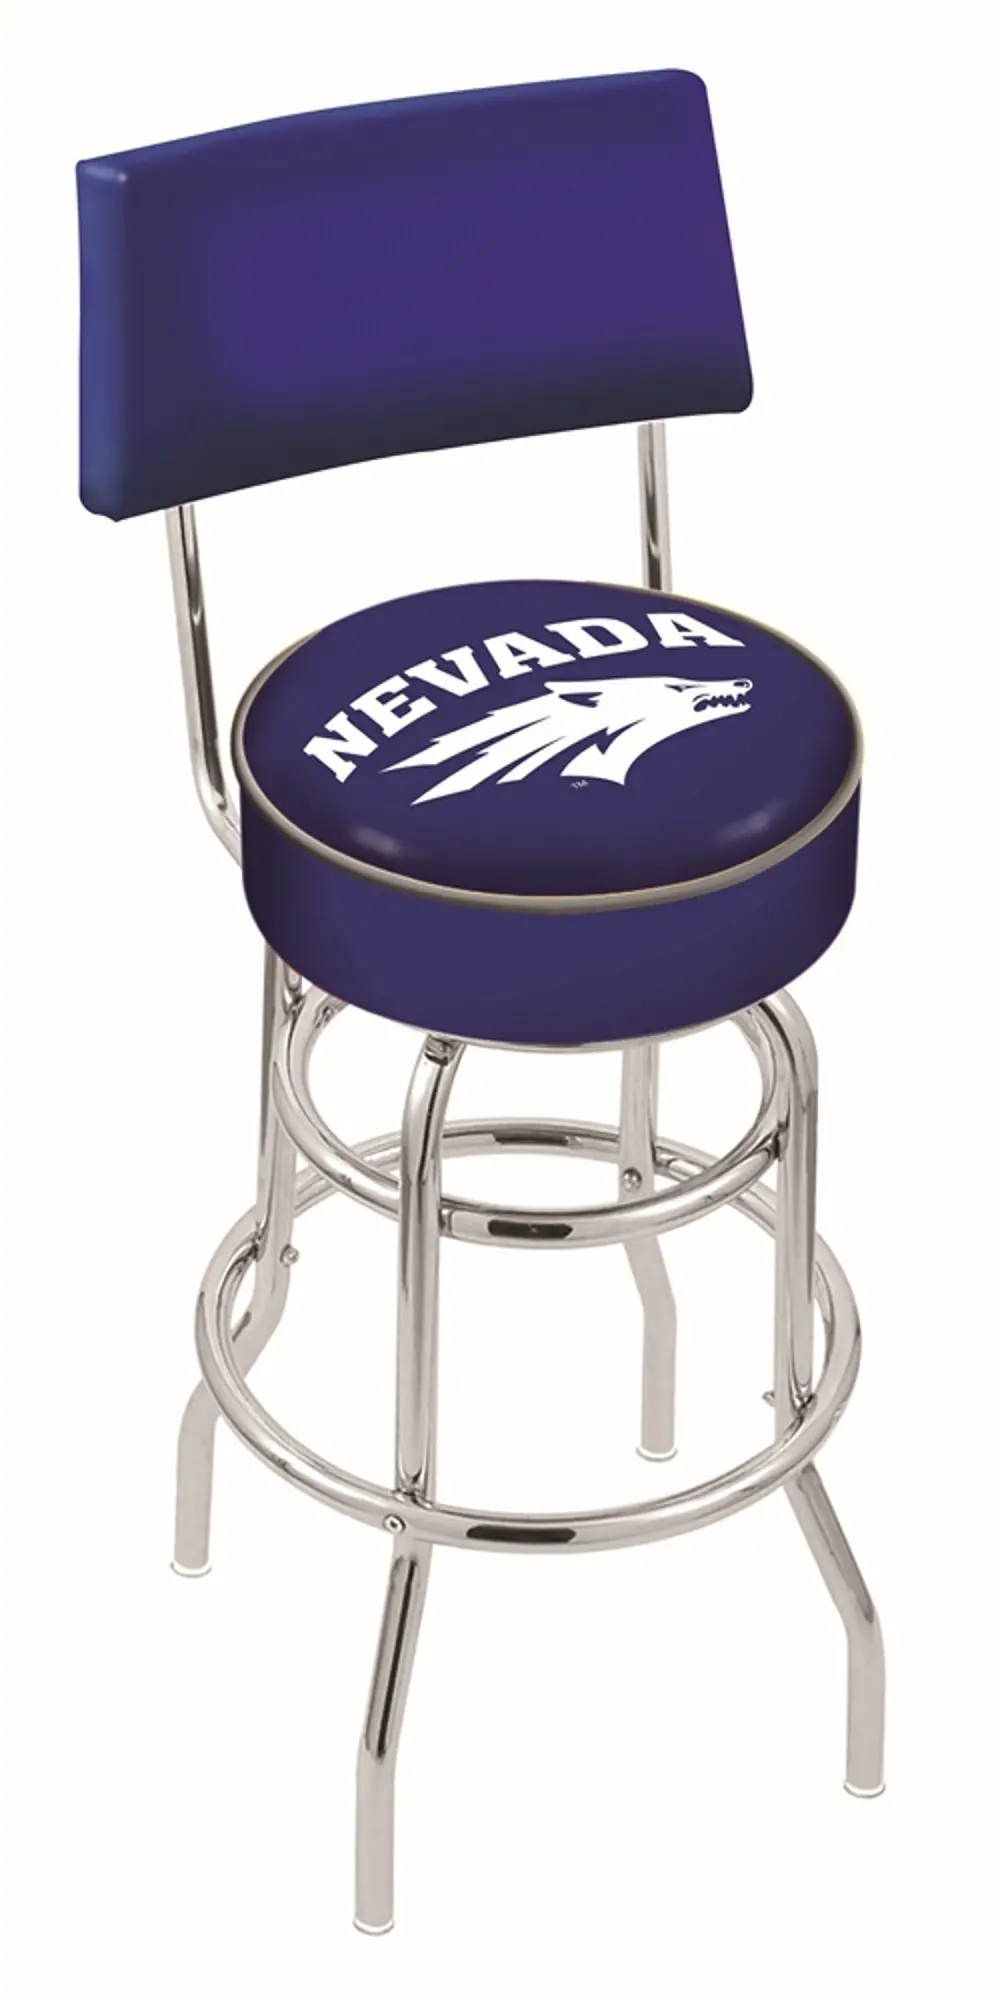 Chrome Swivel Counter Height Stool with Back Rest - UNR-1